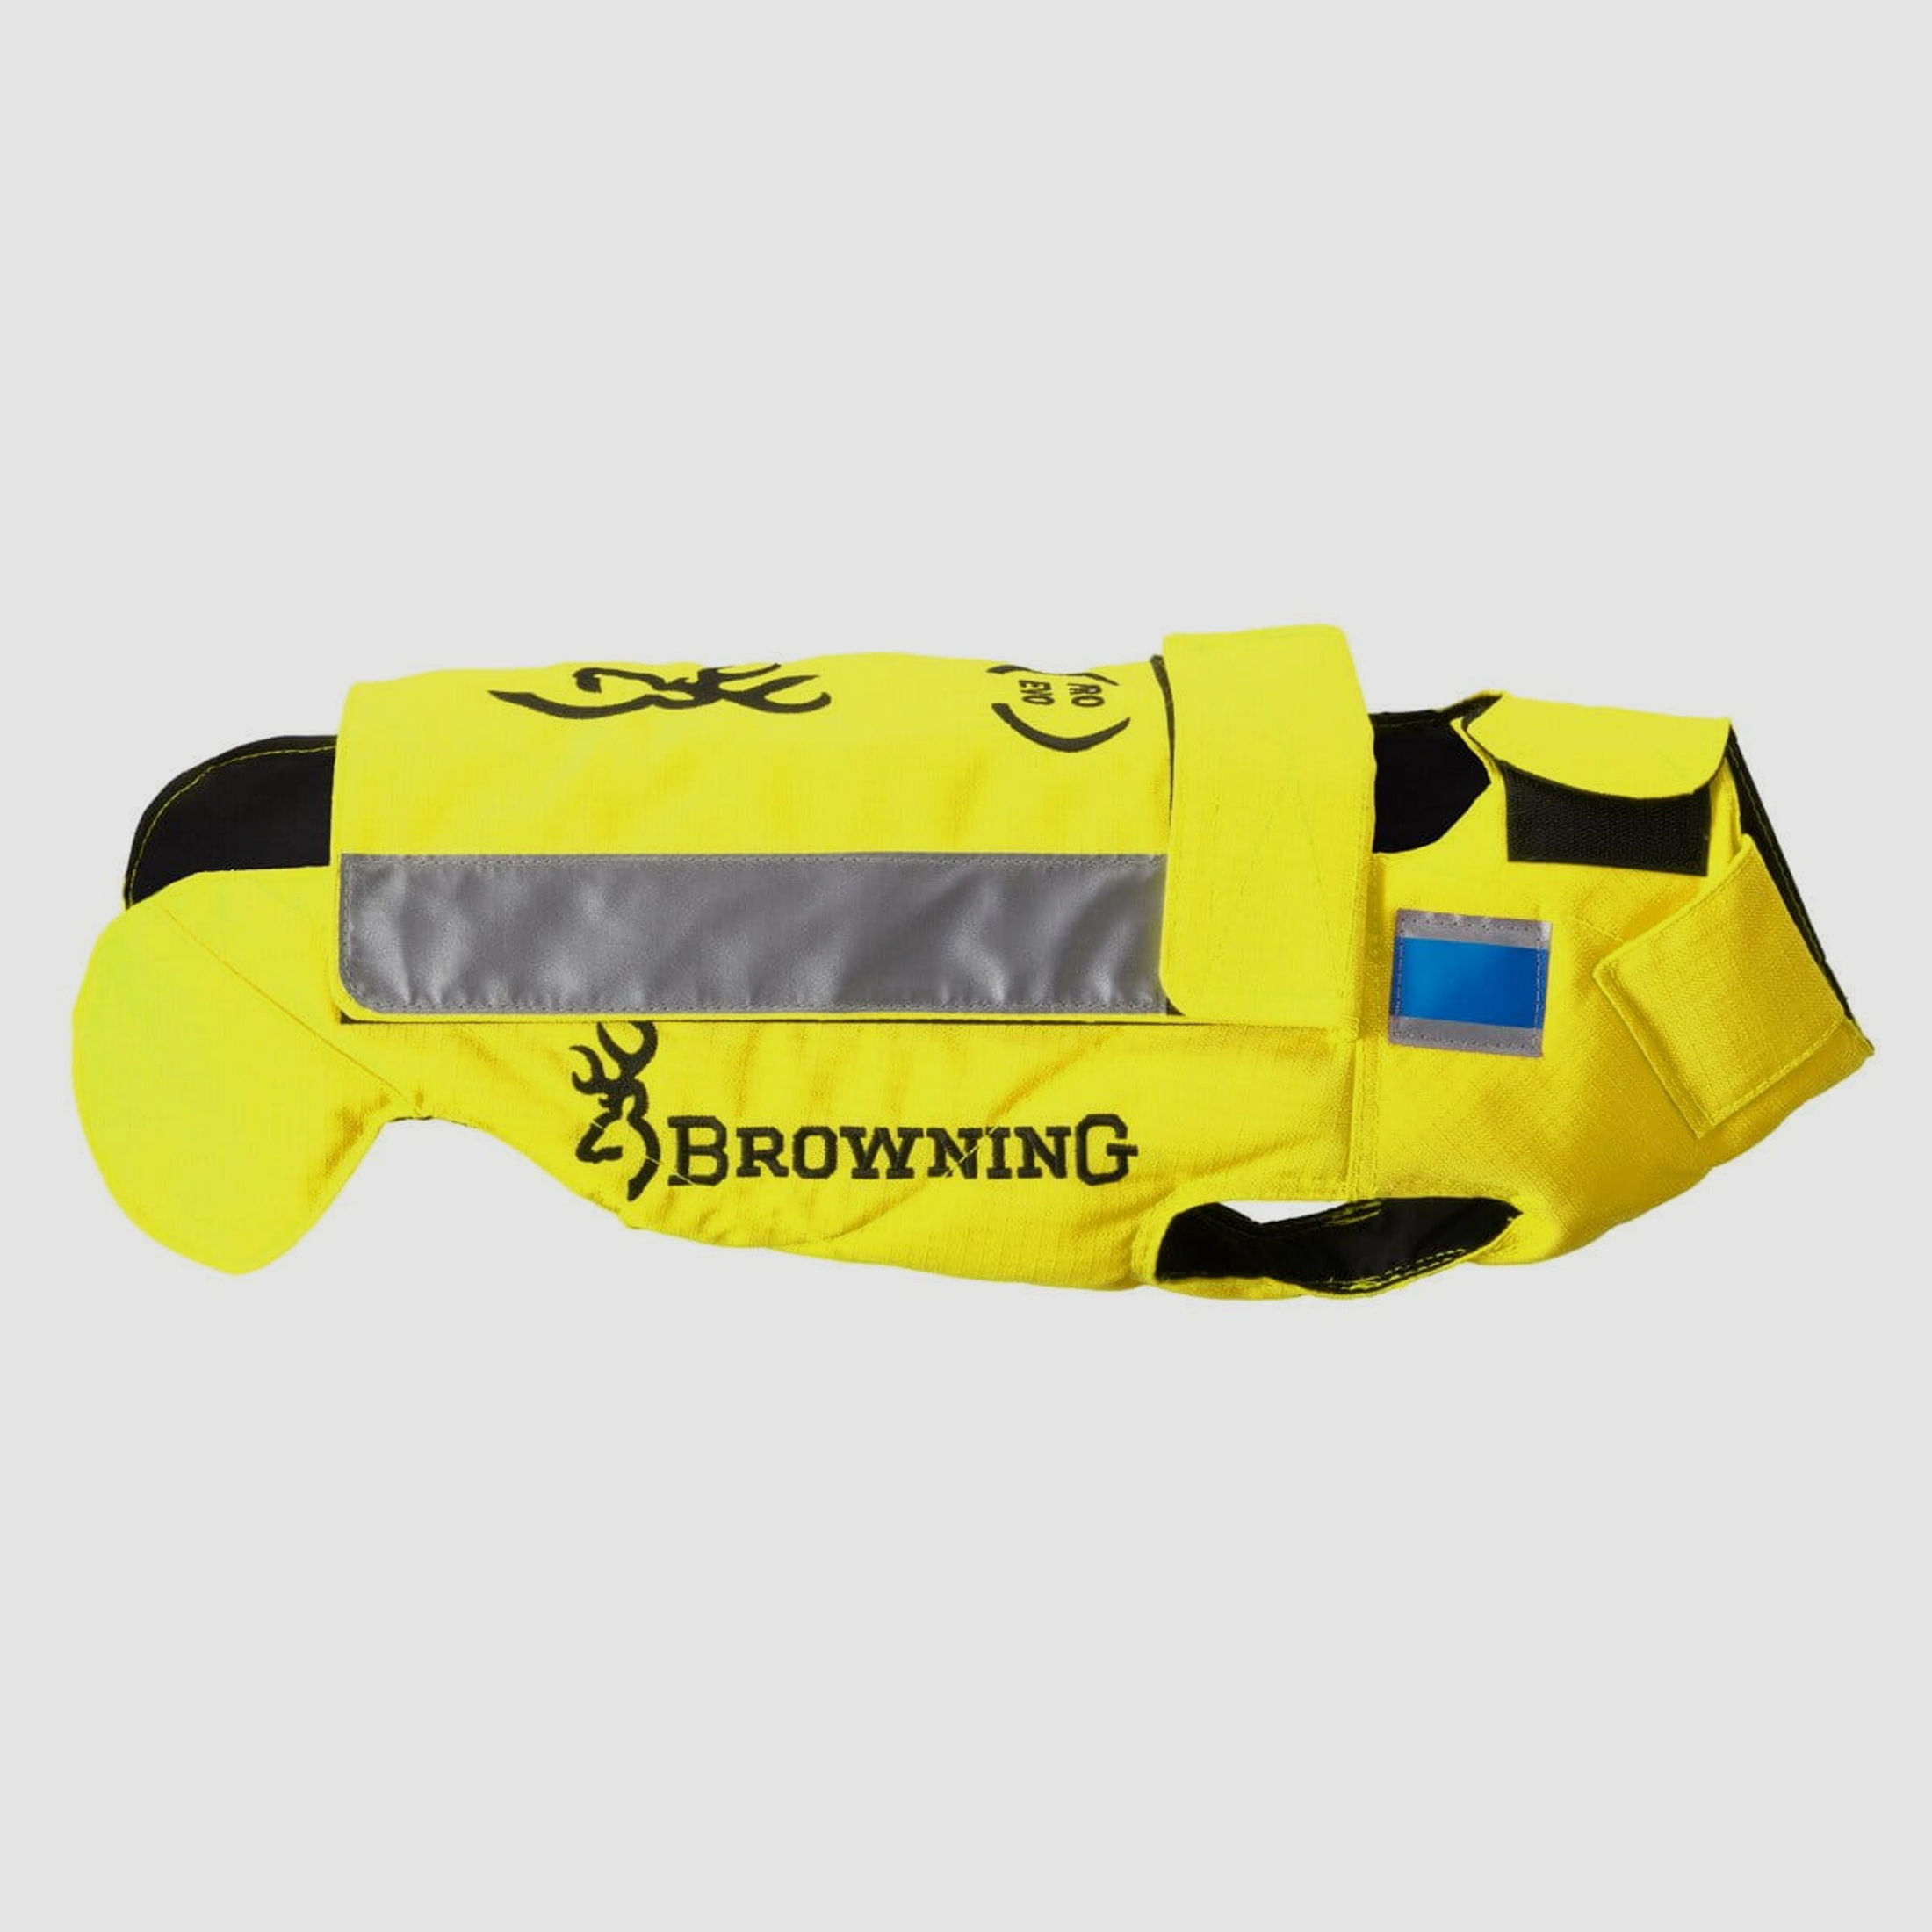 Browning Protect Pro Evo Hundeschutzweste